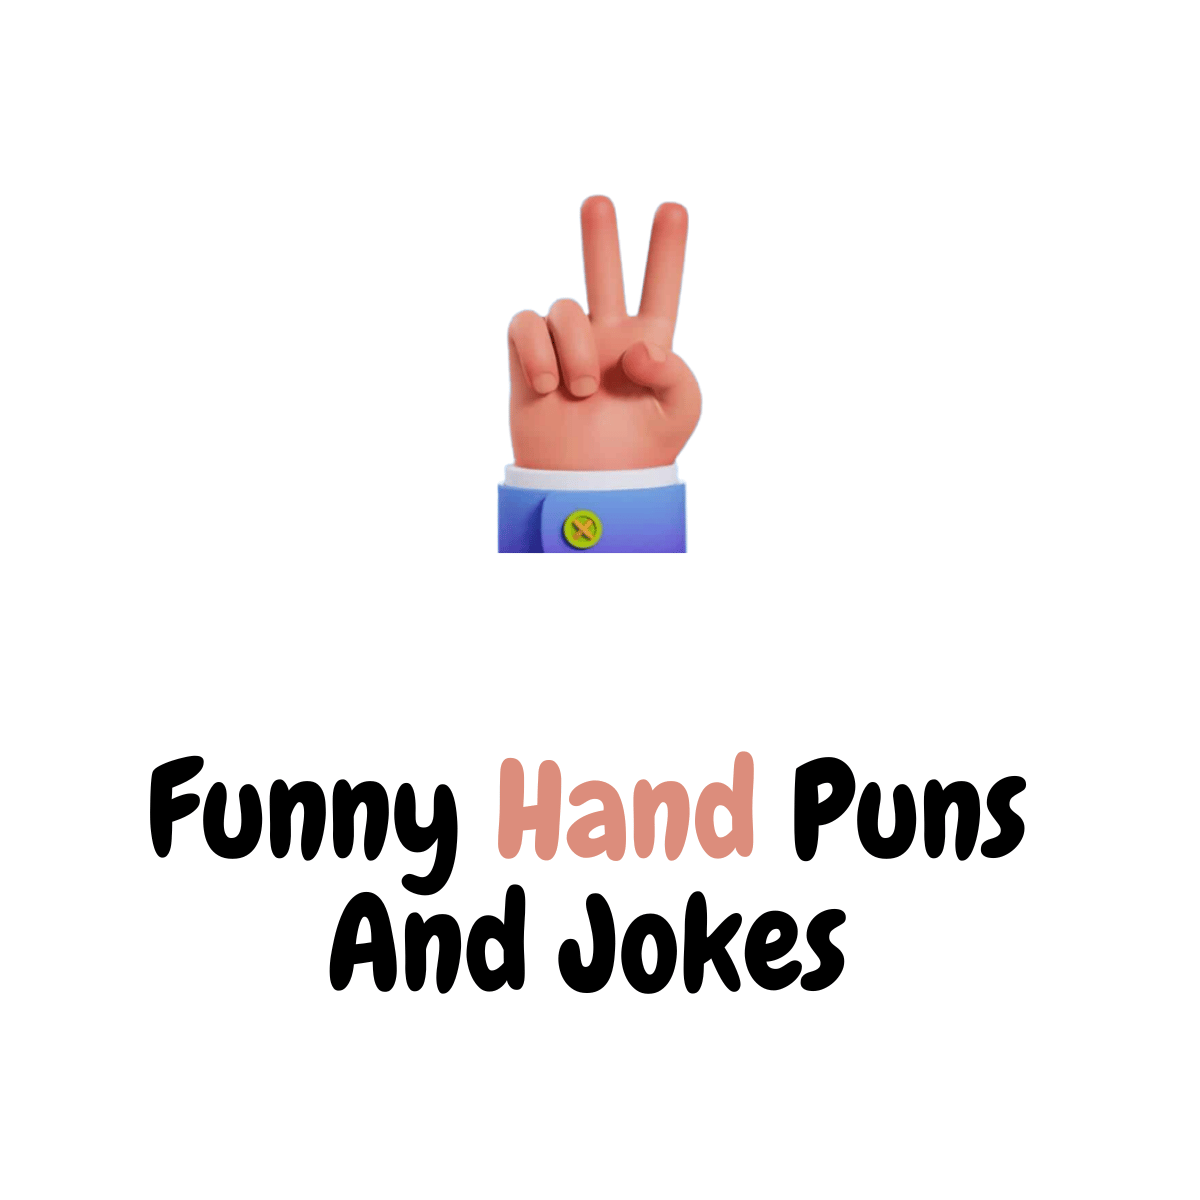 Funny Hand Puns And Jokes